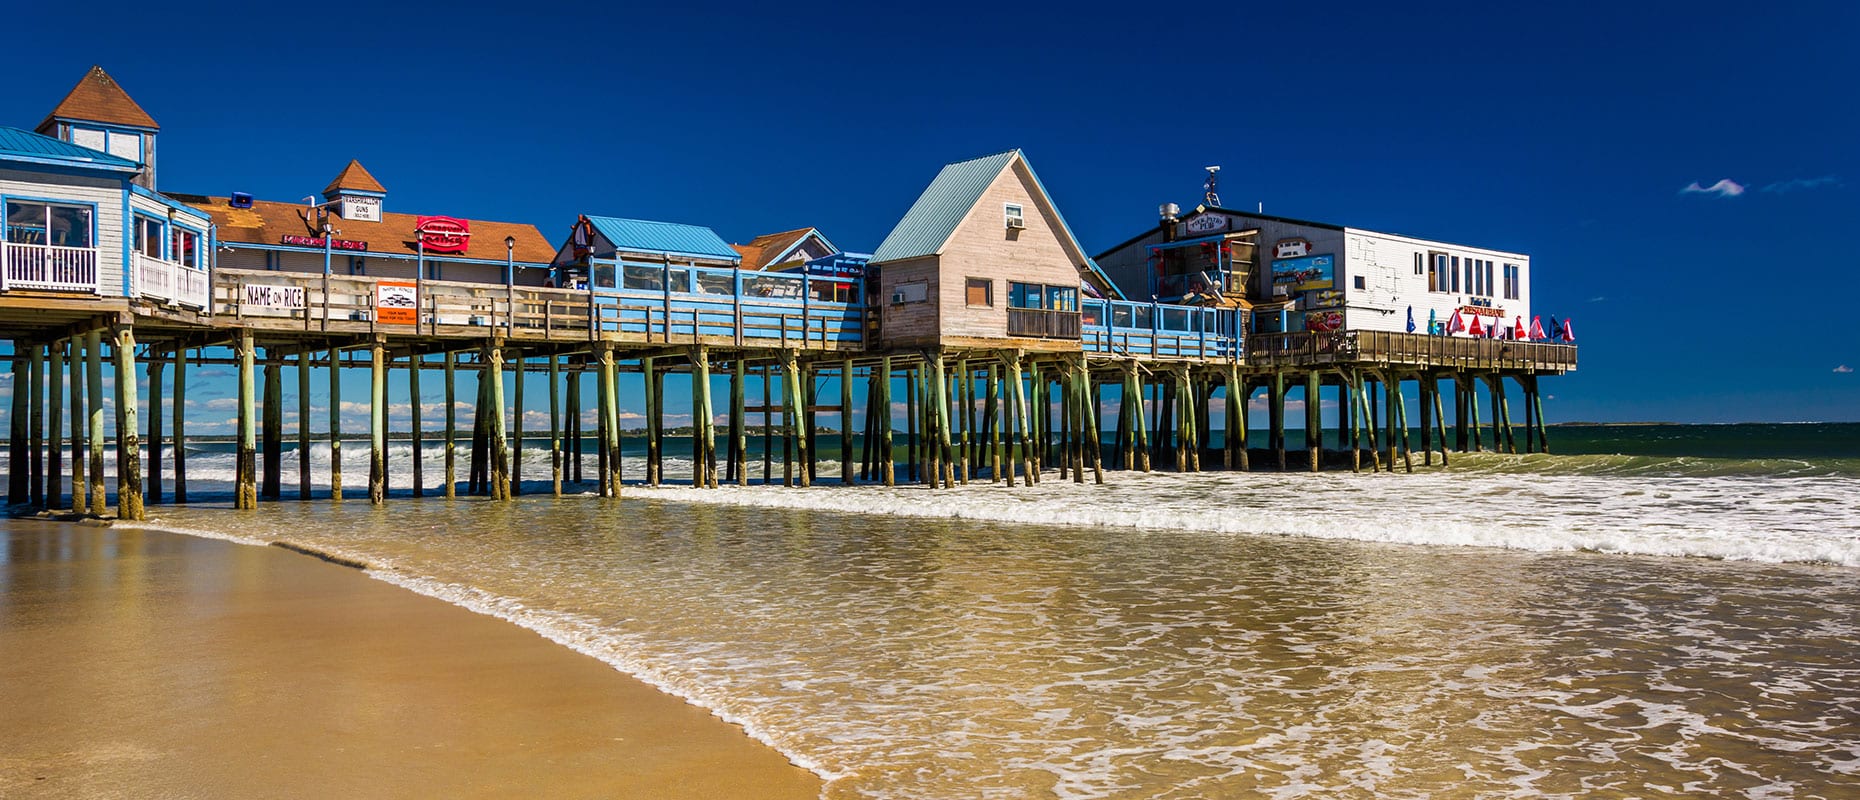 History of Old Orchard Beach Pier - Travel Maine